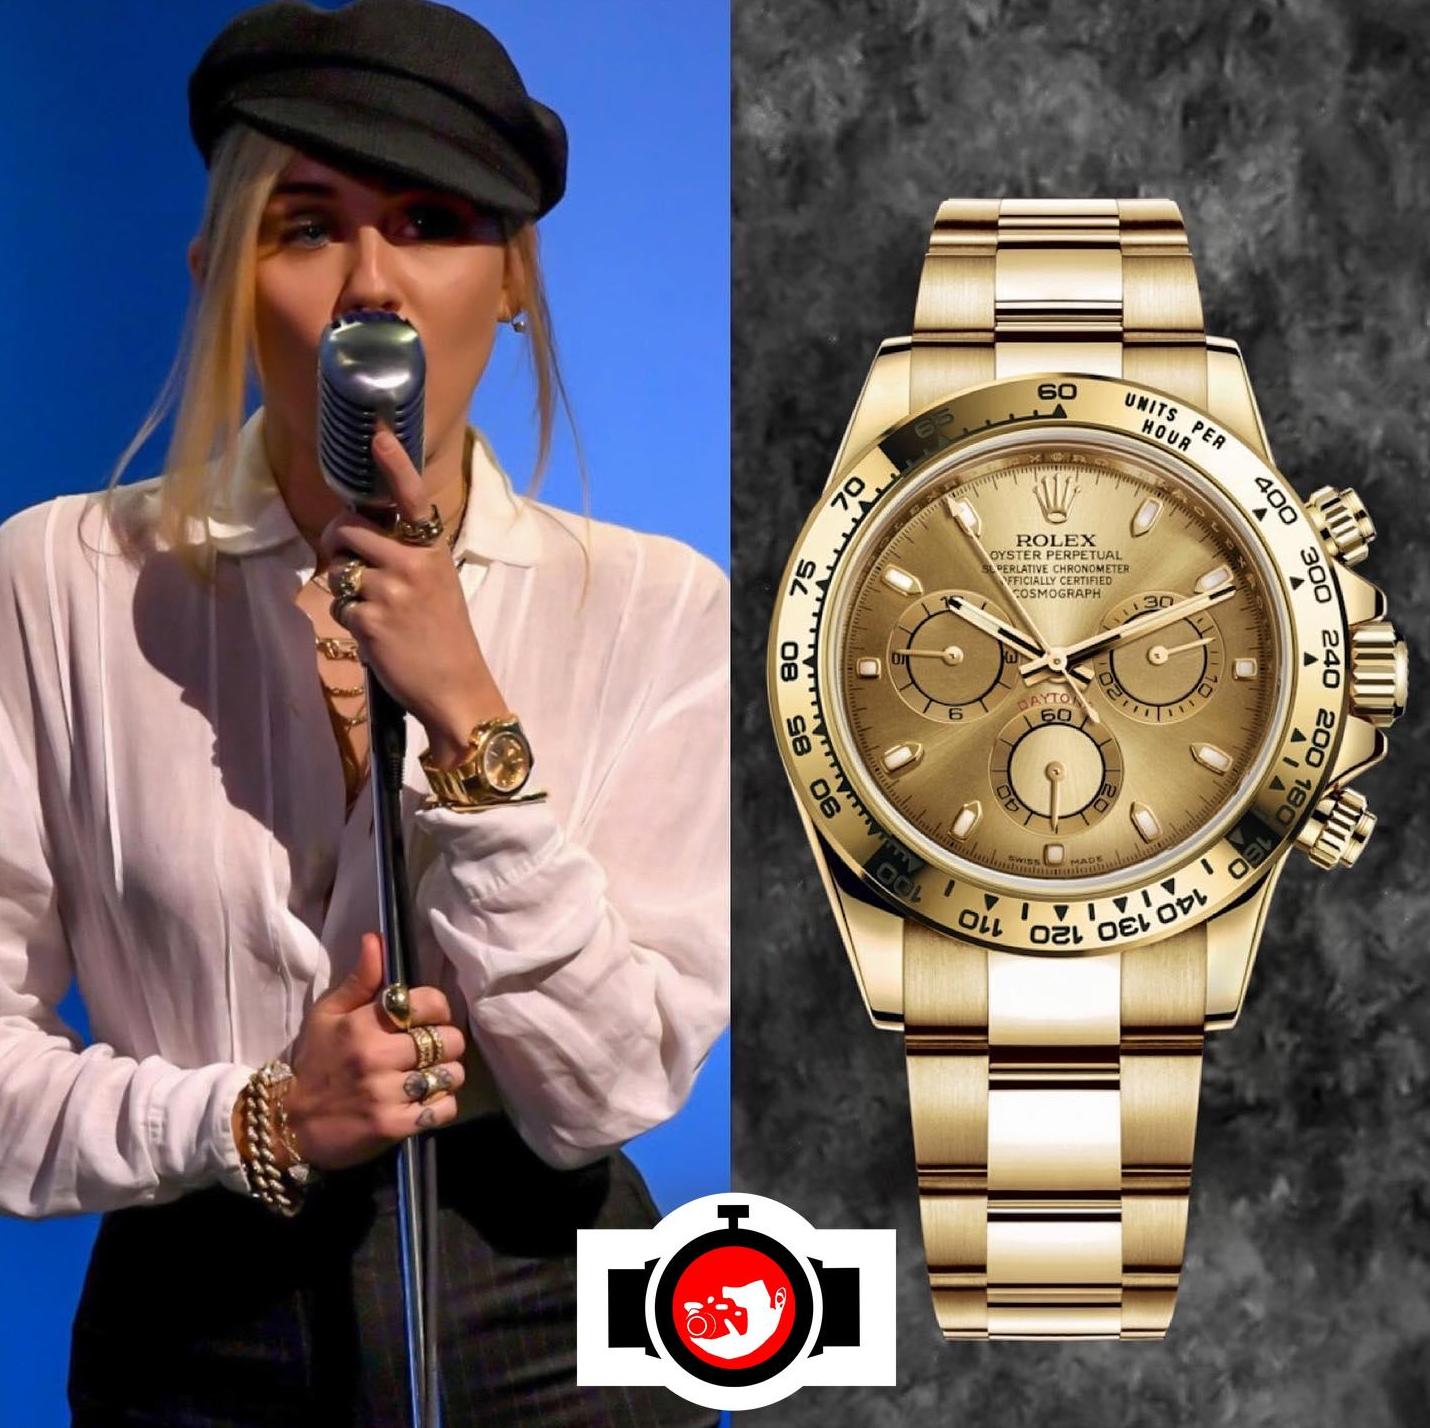 singer Miley Cyrus spotted wearing a Rolex 116508